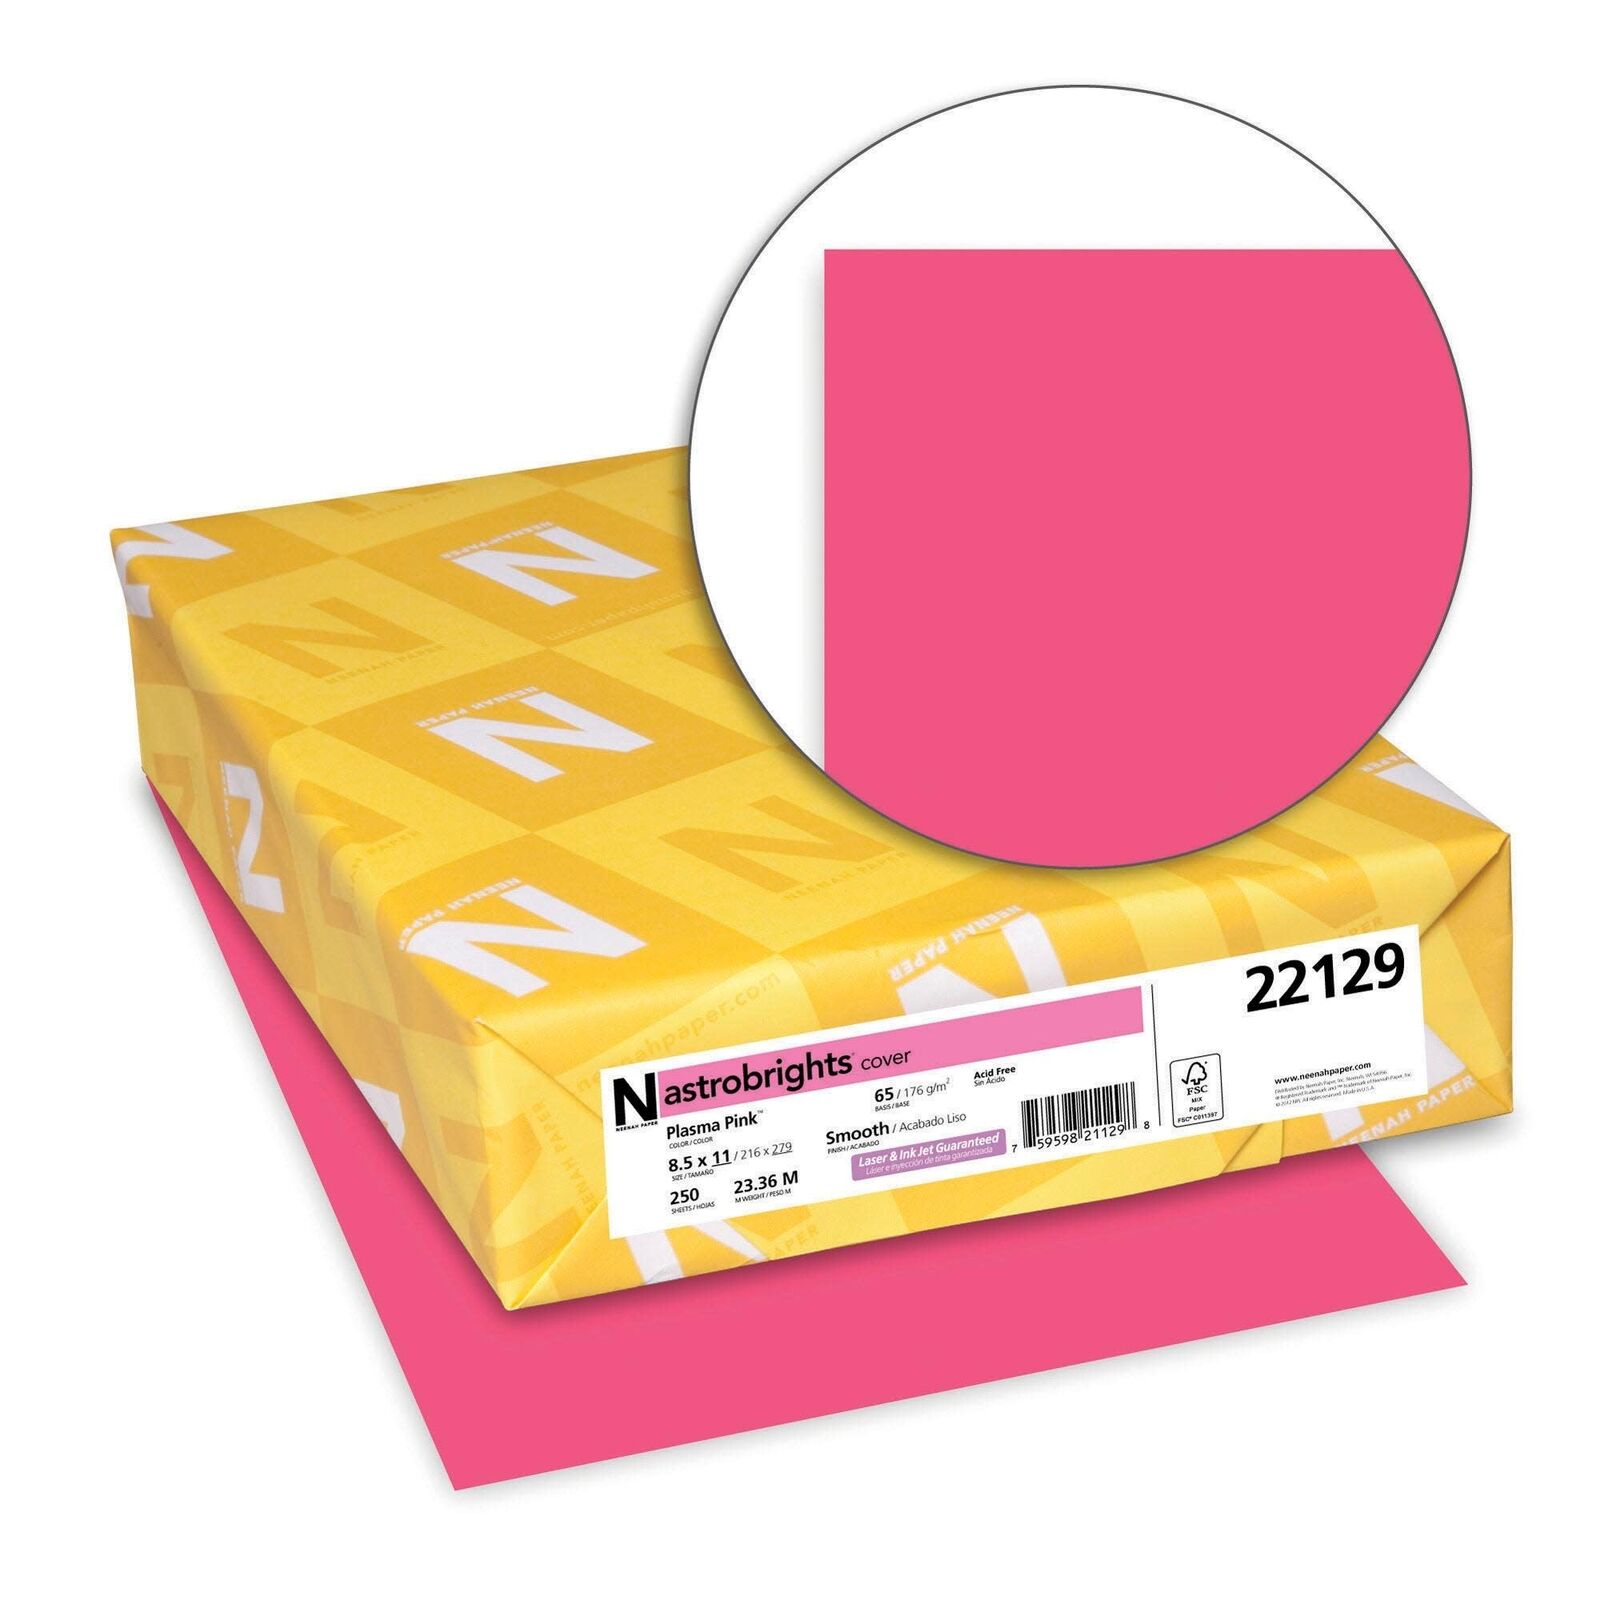 Astrobrights Colored Paper, 8-1/2 x 11 Inches, 24 lb, Plasma Pink, 500 Sheets